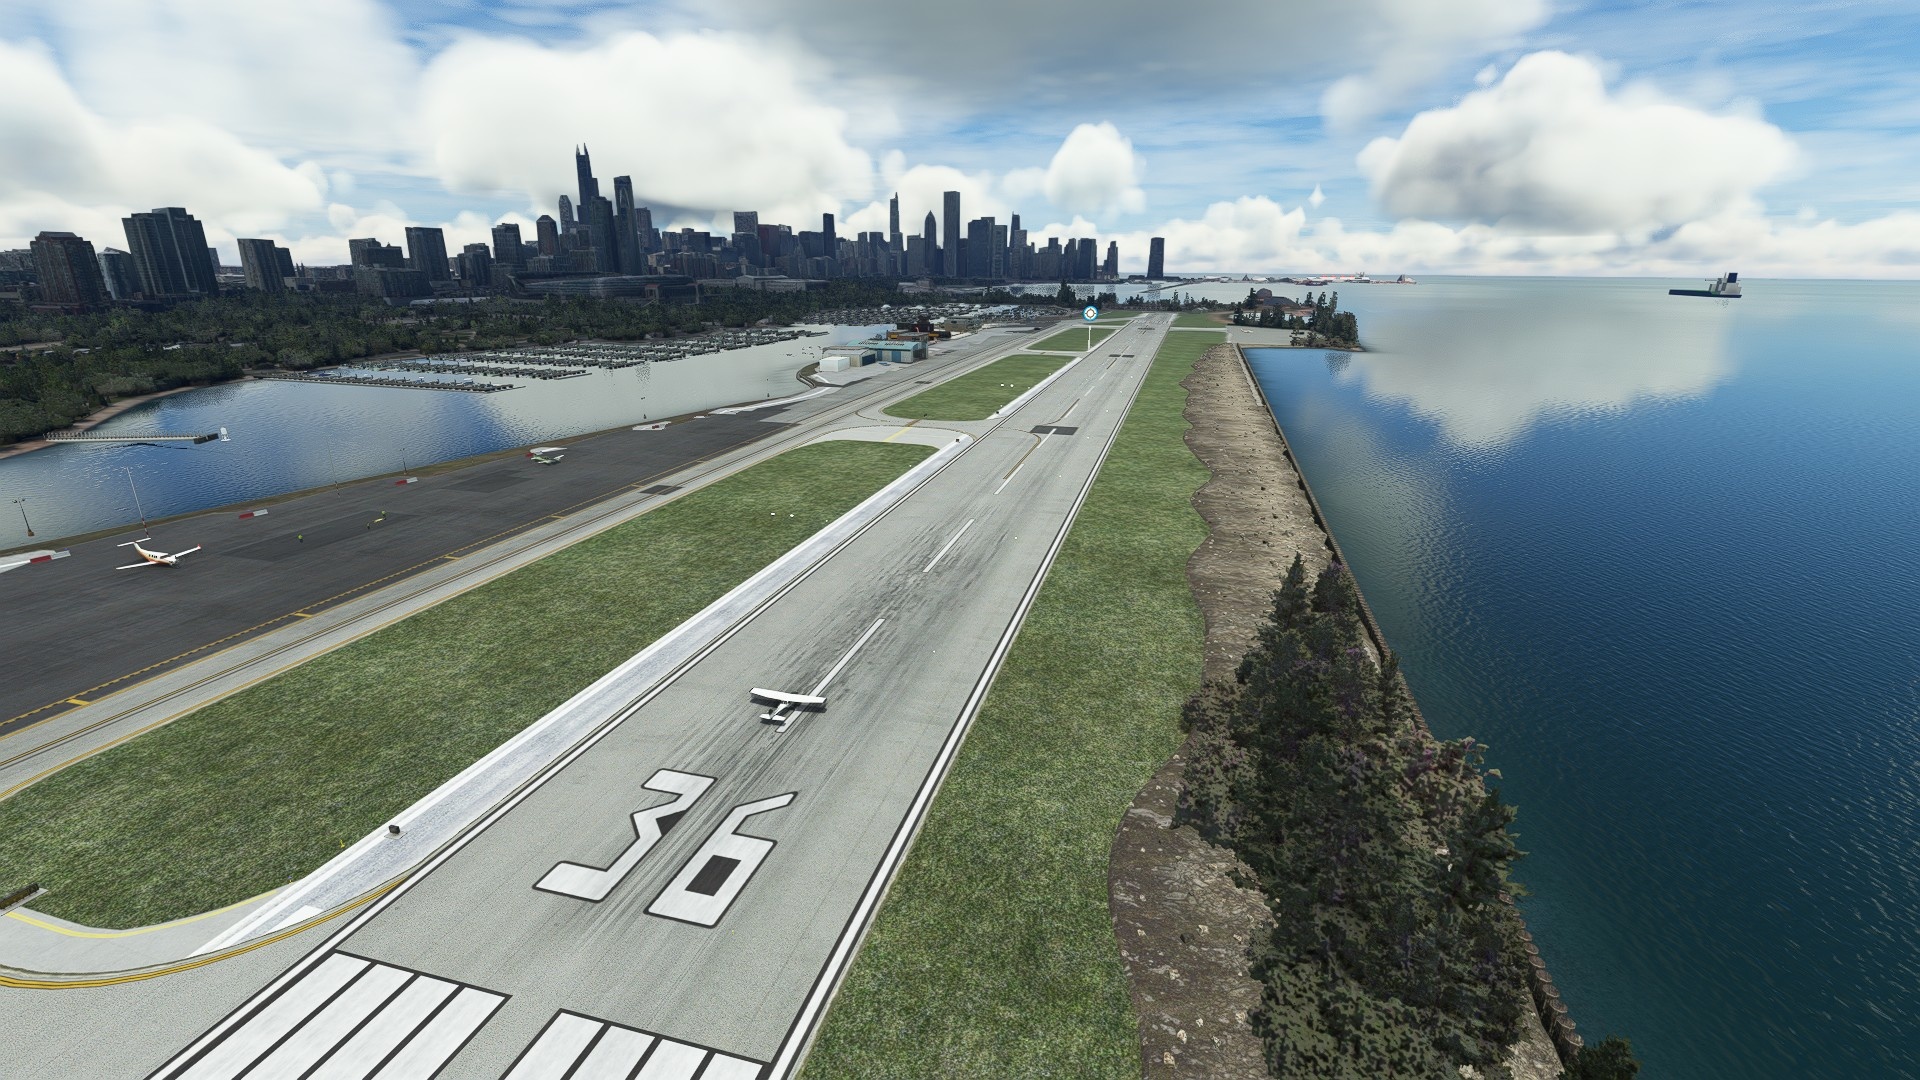 (Another view of Meigs Field this image has been imprinted especially in older simulator users for decades)